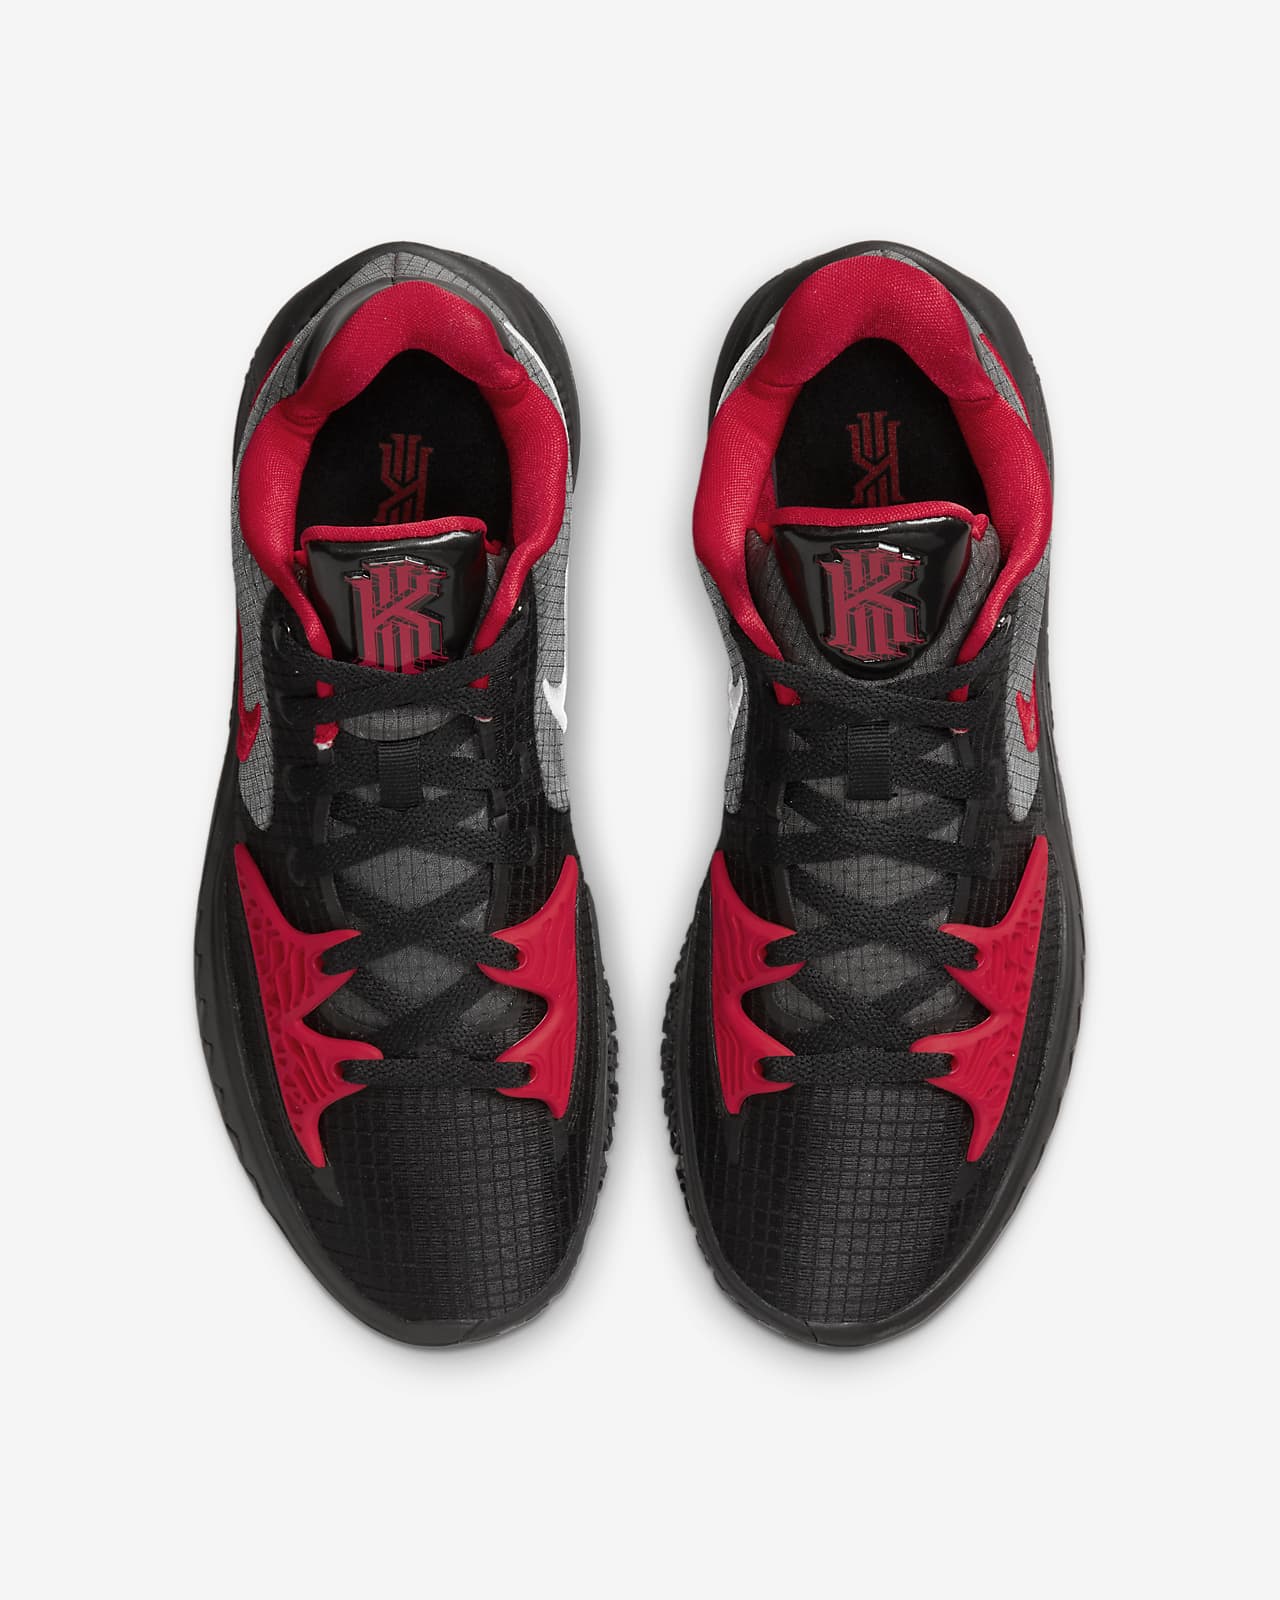 Kyrie Low 4 EP Basketball Shoe.